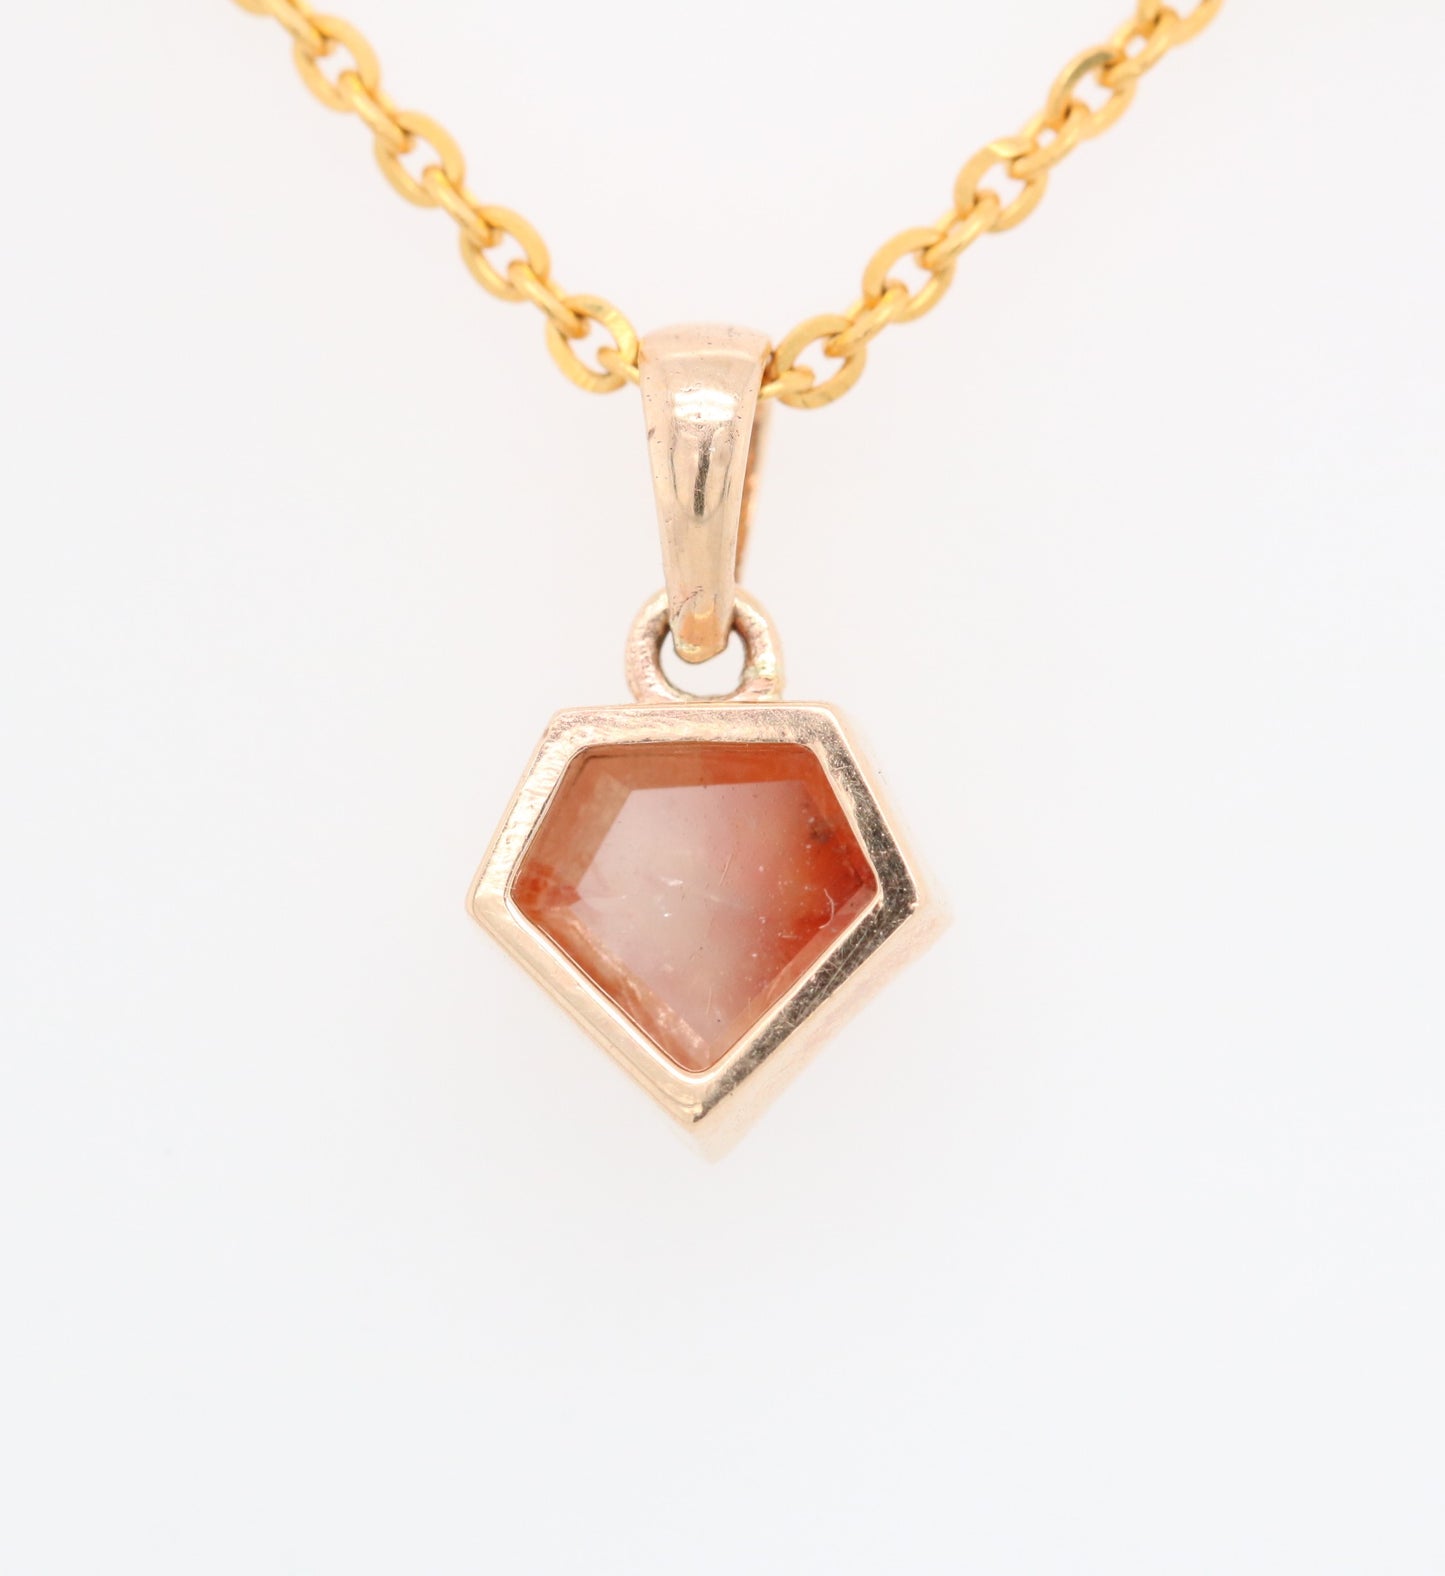 Shield Cut Peach Diamond Pendant with 18K Yellow Gold Chain Necklace For Women